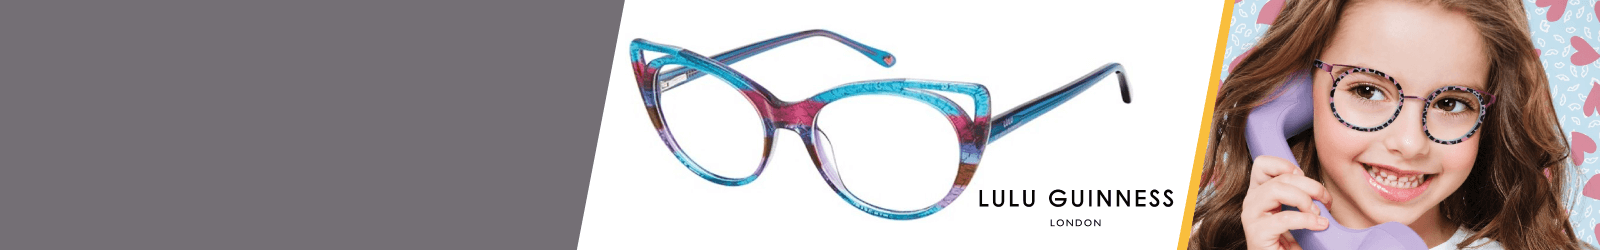 Glitter Lulu Guinness Kids Glasses from 2 to 4-year-old